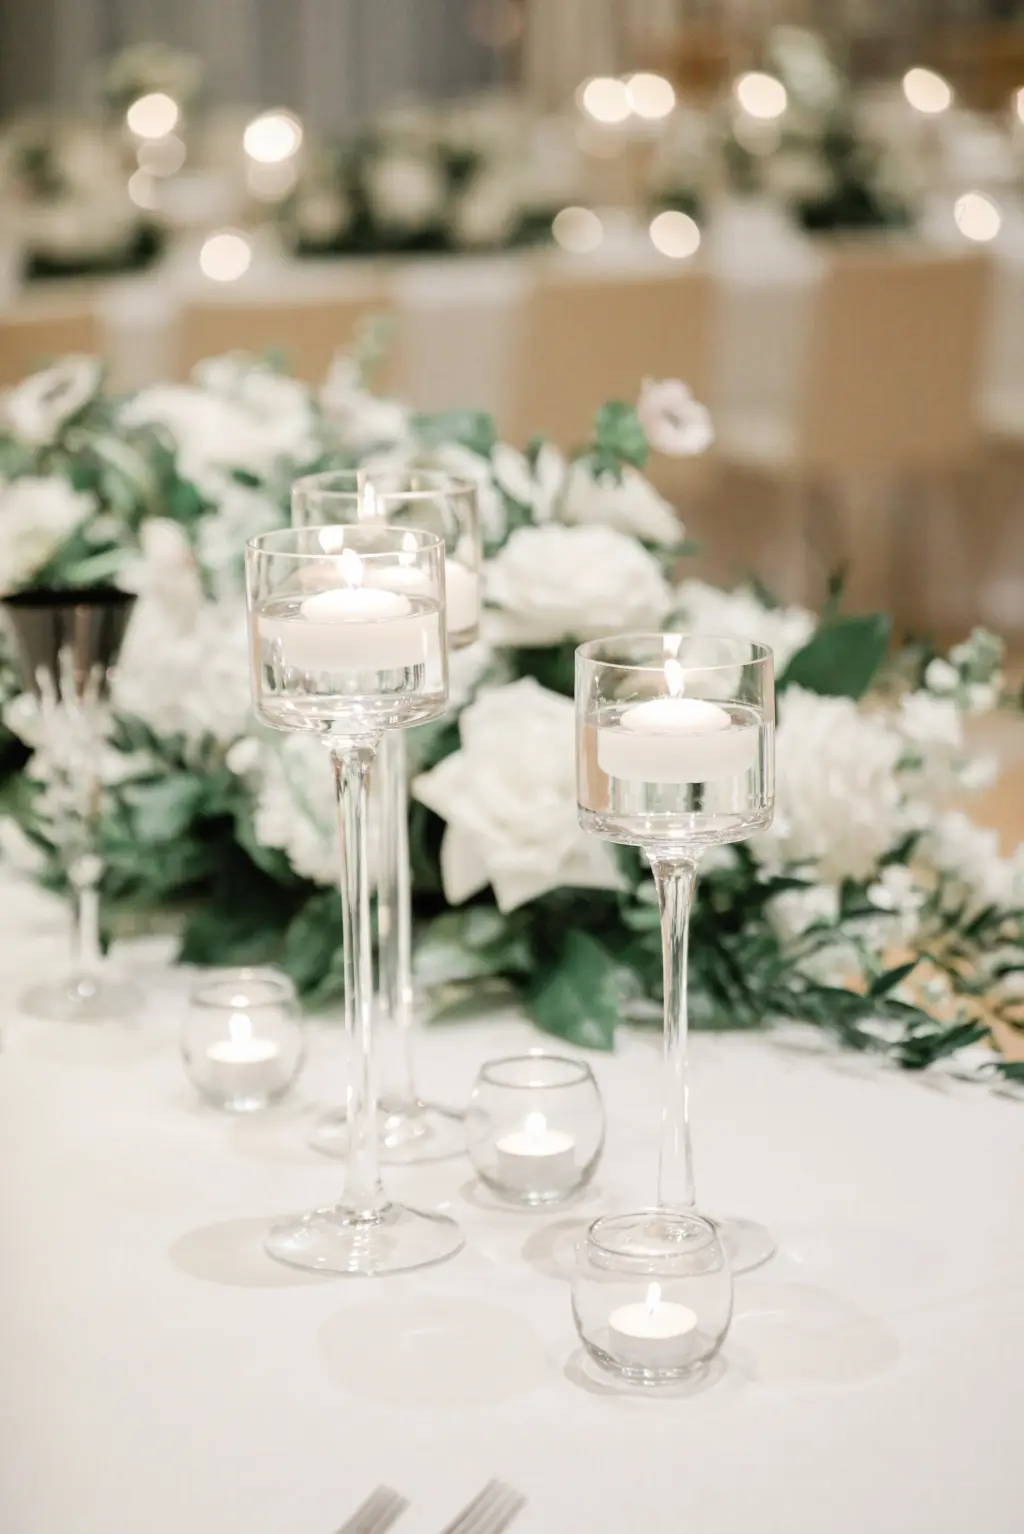 Floating Candle Centerpiece Decor for White Wedding Reception Ideas